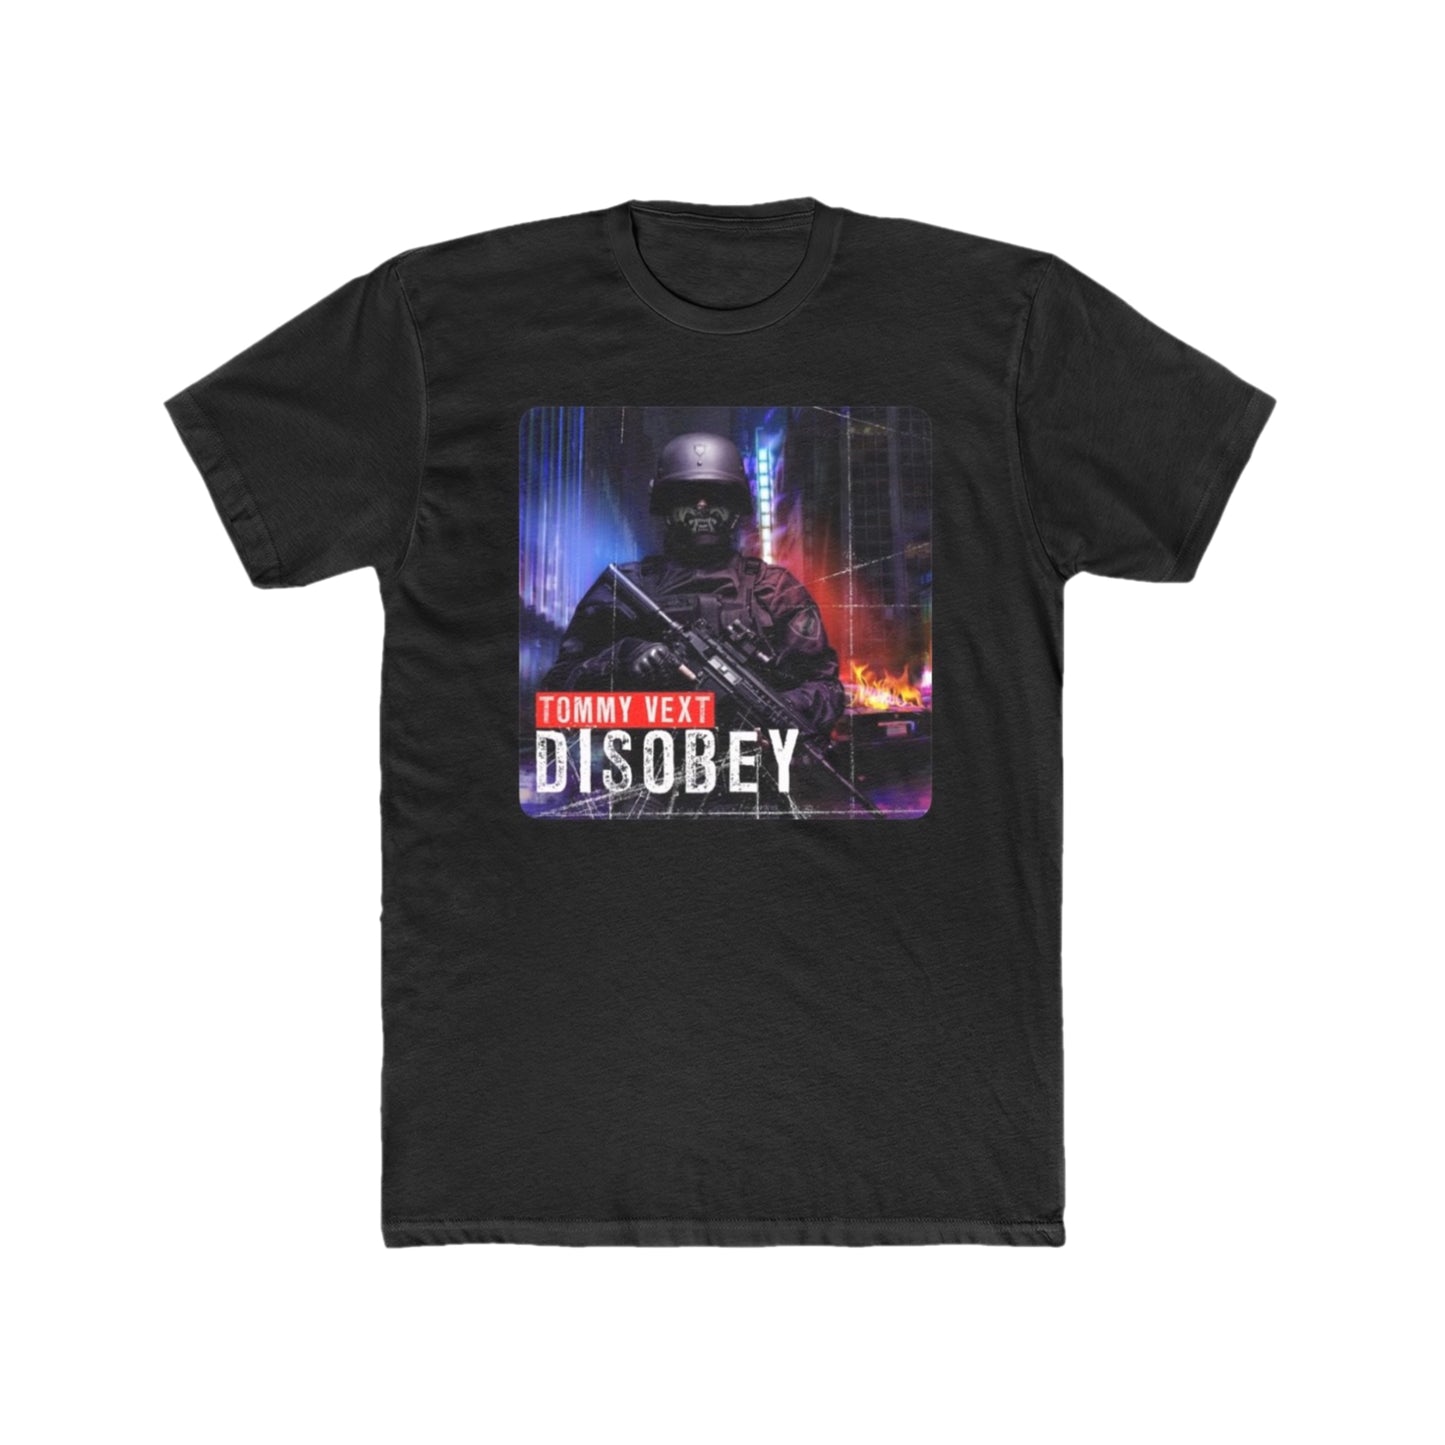 Disobey Tee